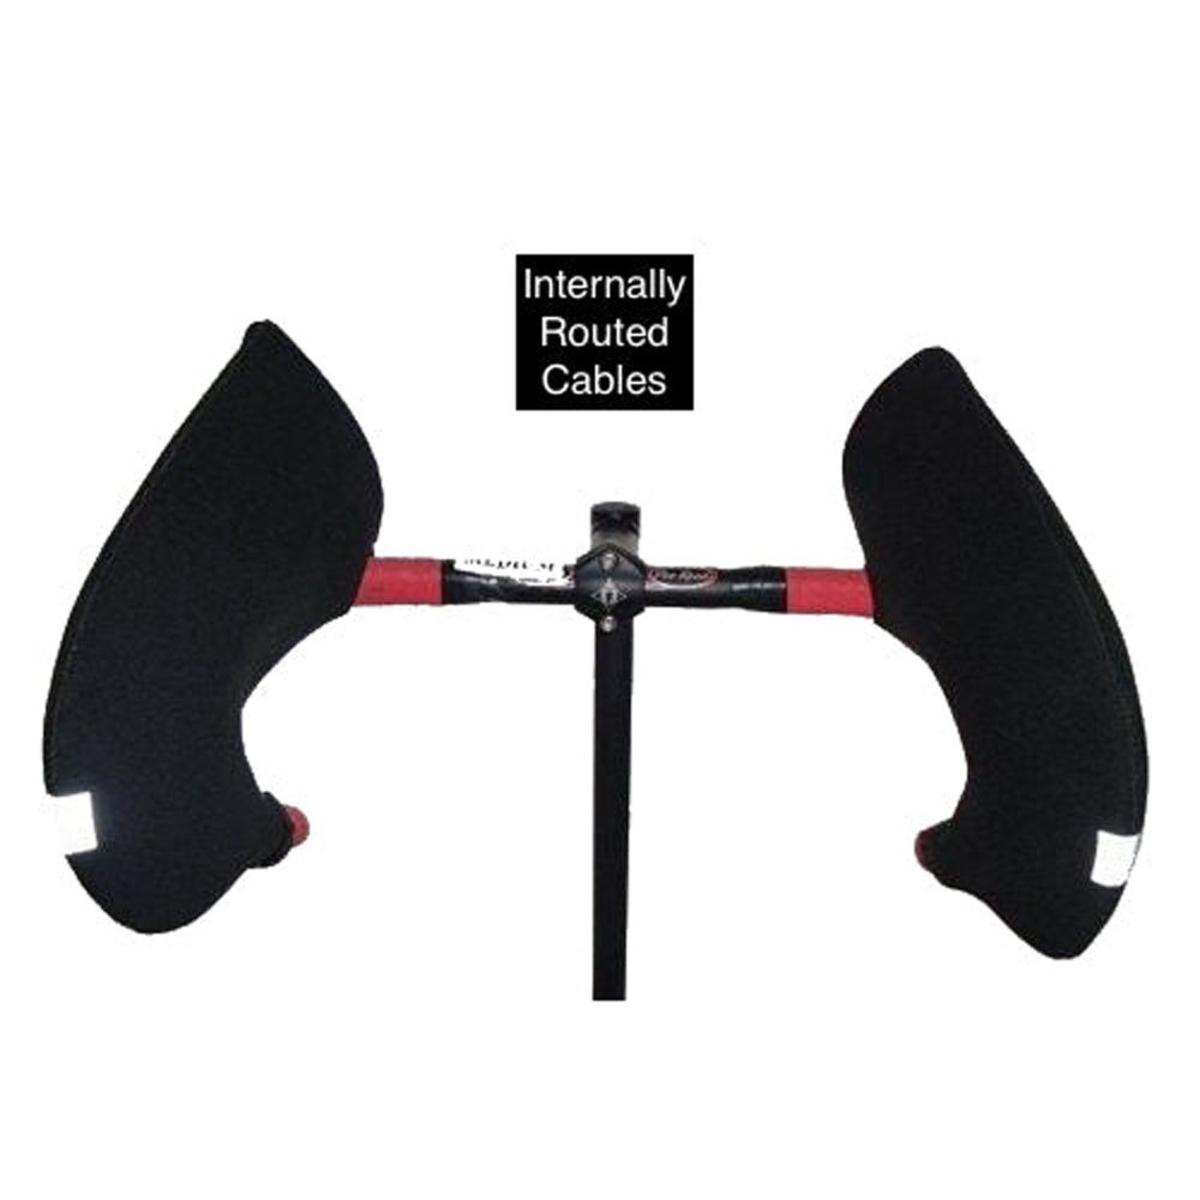 Bar Mitts Internally Routed Cables Road Pogie Handlebar Mittens Hydraulic - XL Black